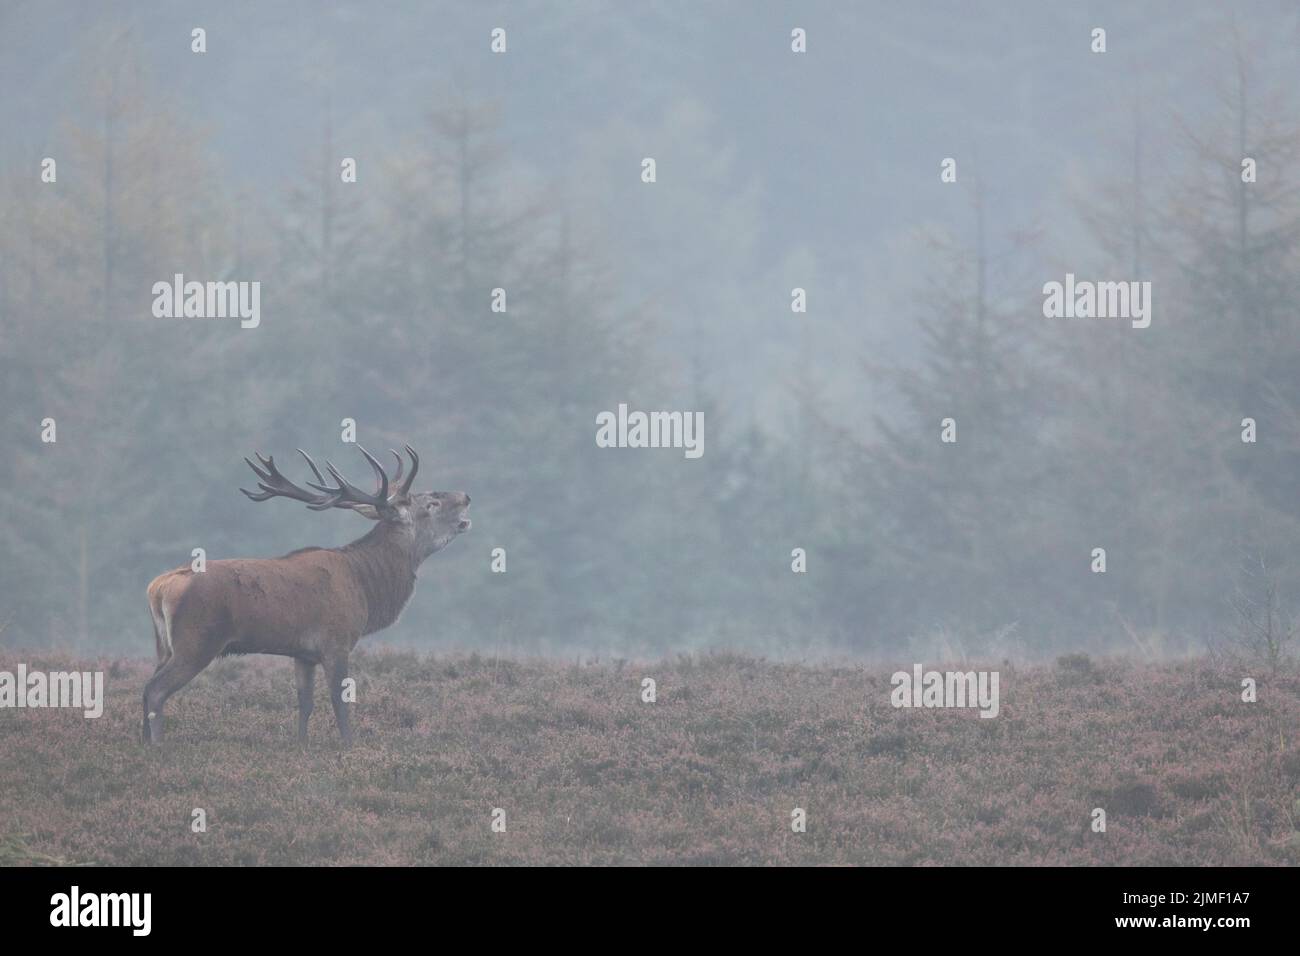 A Red stag stands roaring on a heathland / Cervus elaphus Stock Photo